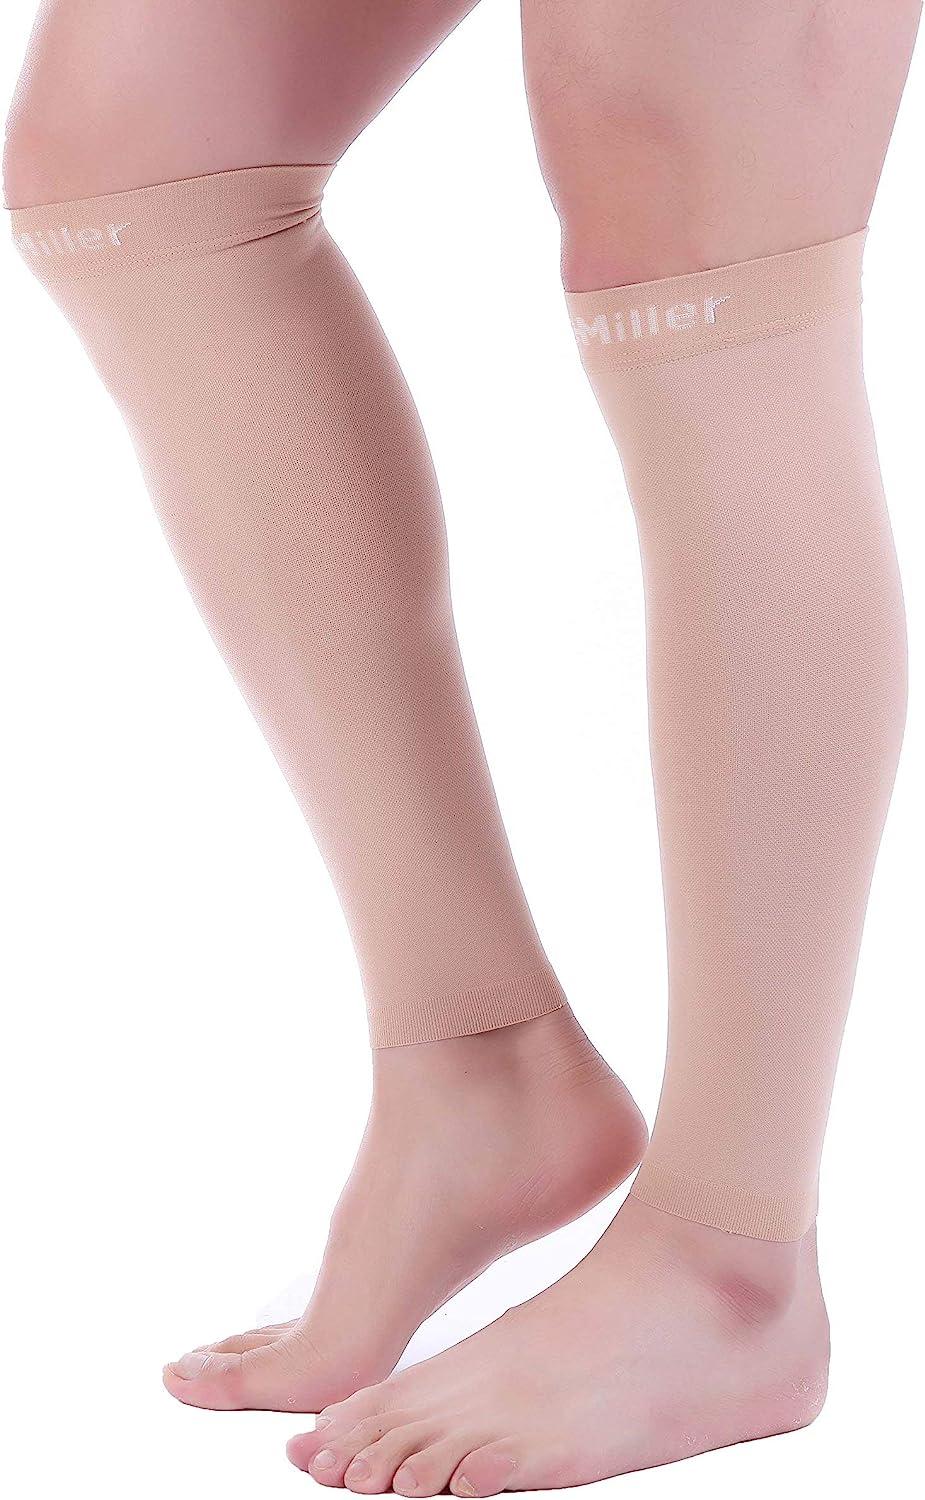 Doc Miller Calf Compression Sleeve Men and Women - 20-30mmHg Shin Splint Compression  Sleeve Recover Varicose Veins, Torn Calf and Pain Relief - 1 Pair Calf  Sleeves Skin Color - Large Size Large Skin